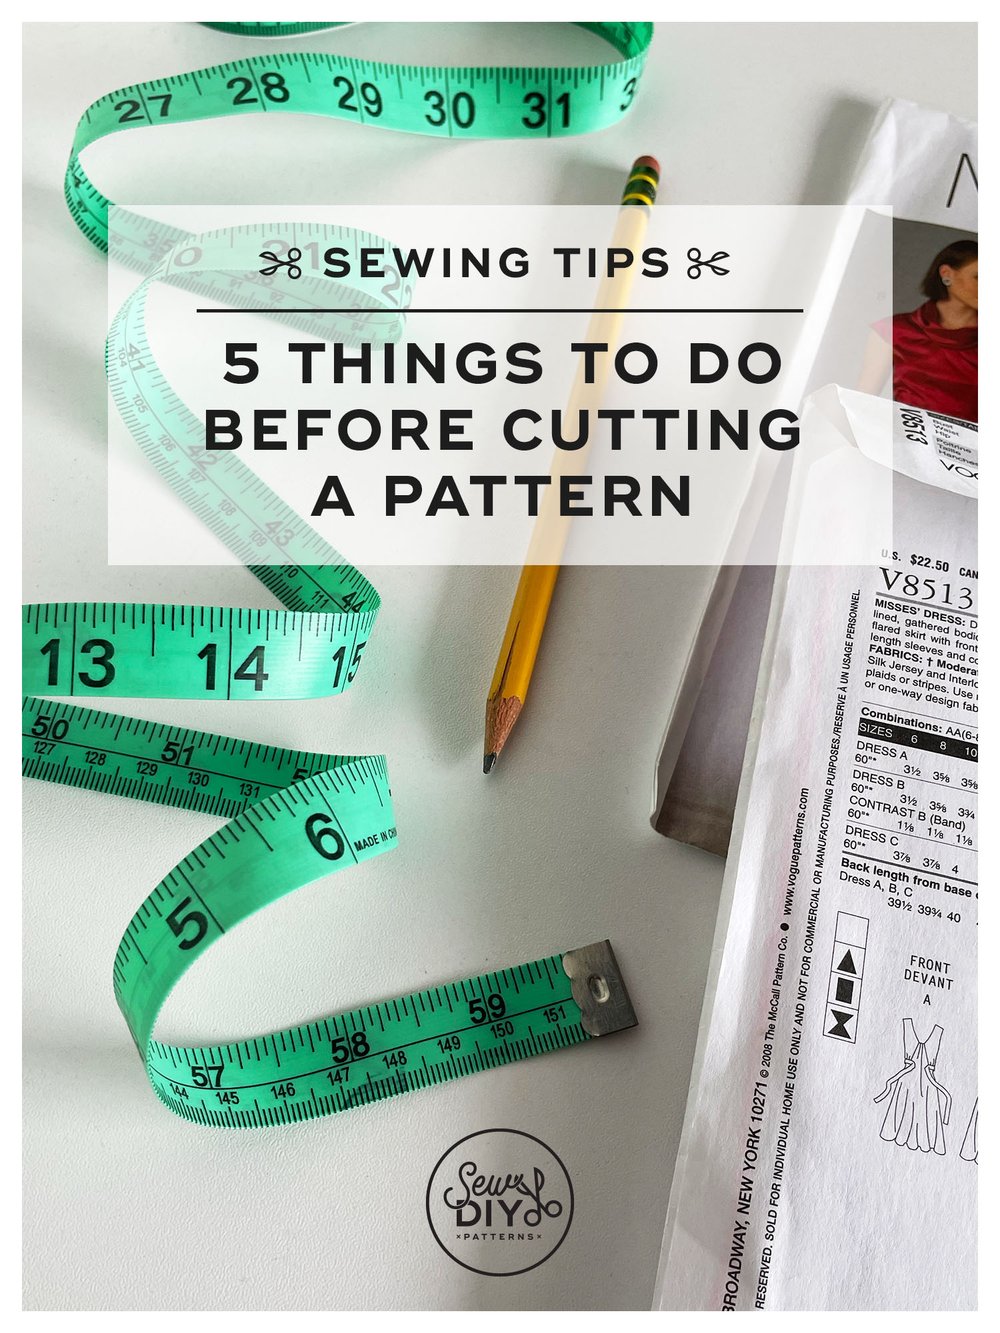 Sewing Tips—5 Things To Do Before Cutting a Sewing Pattern